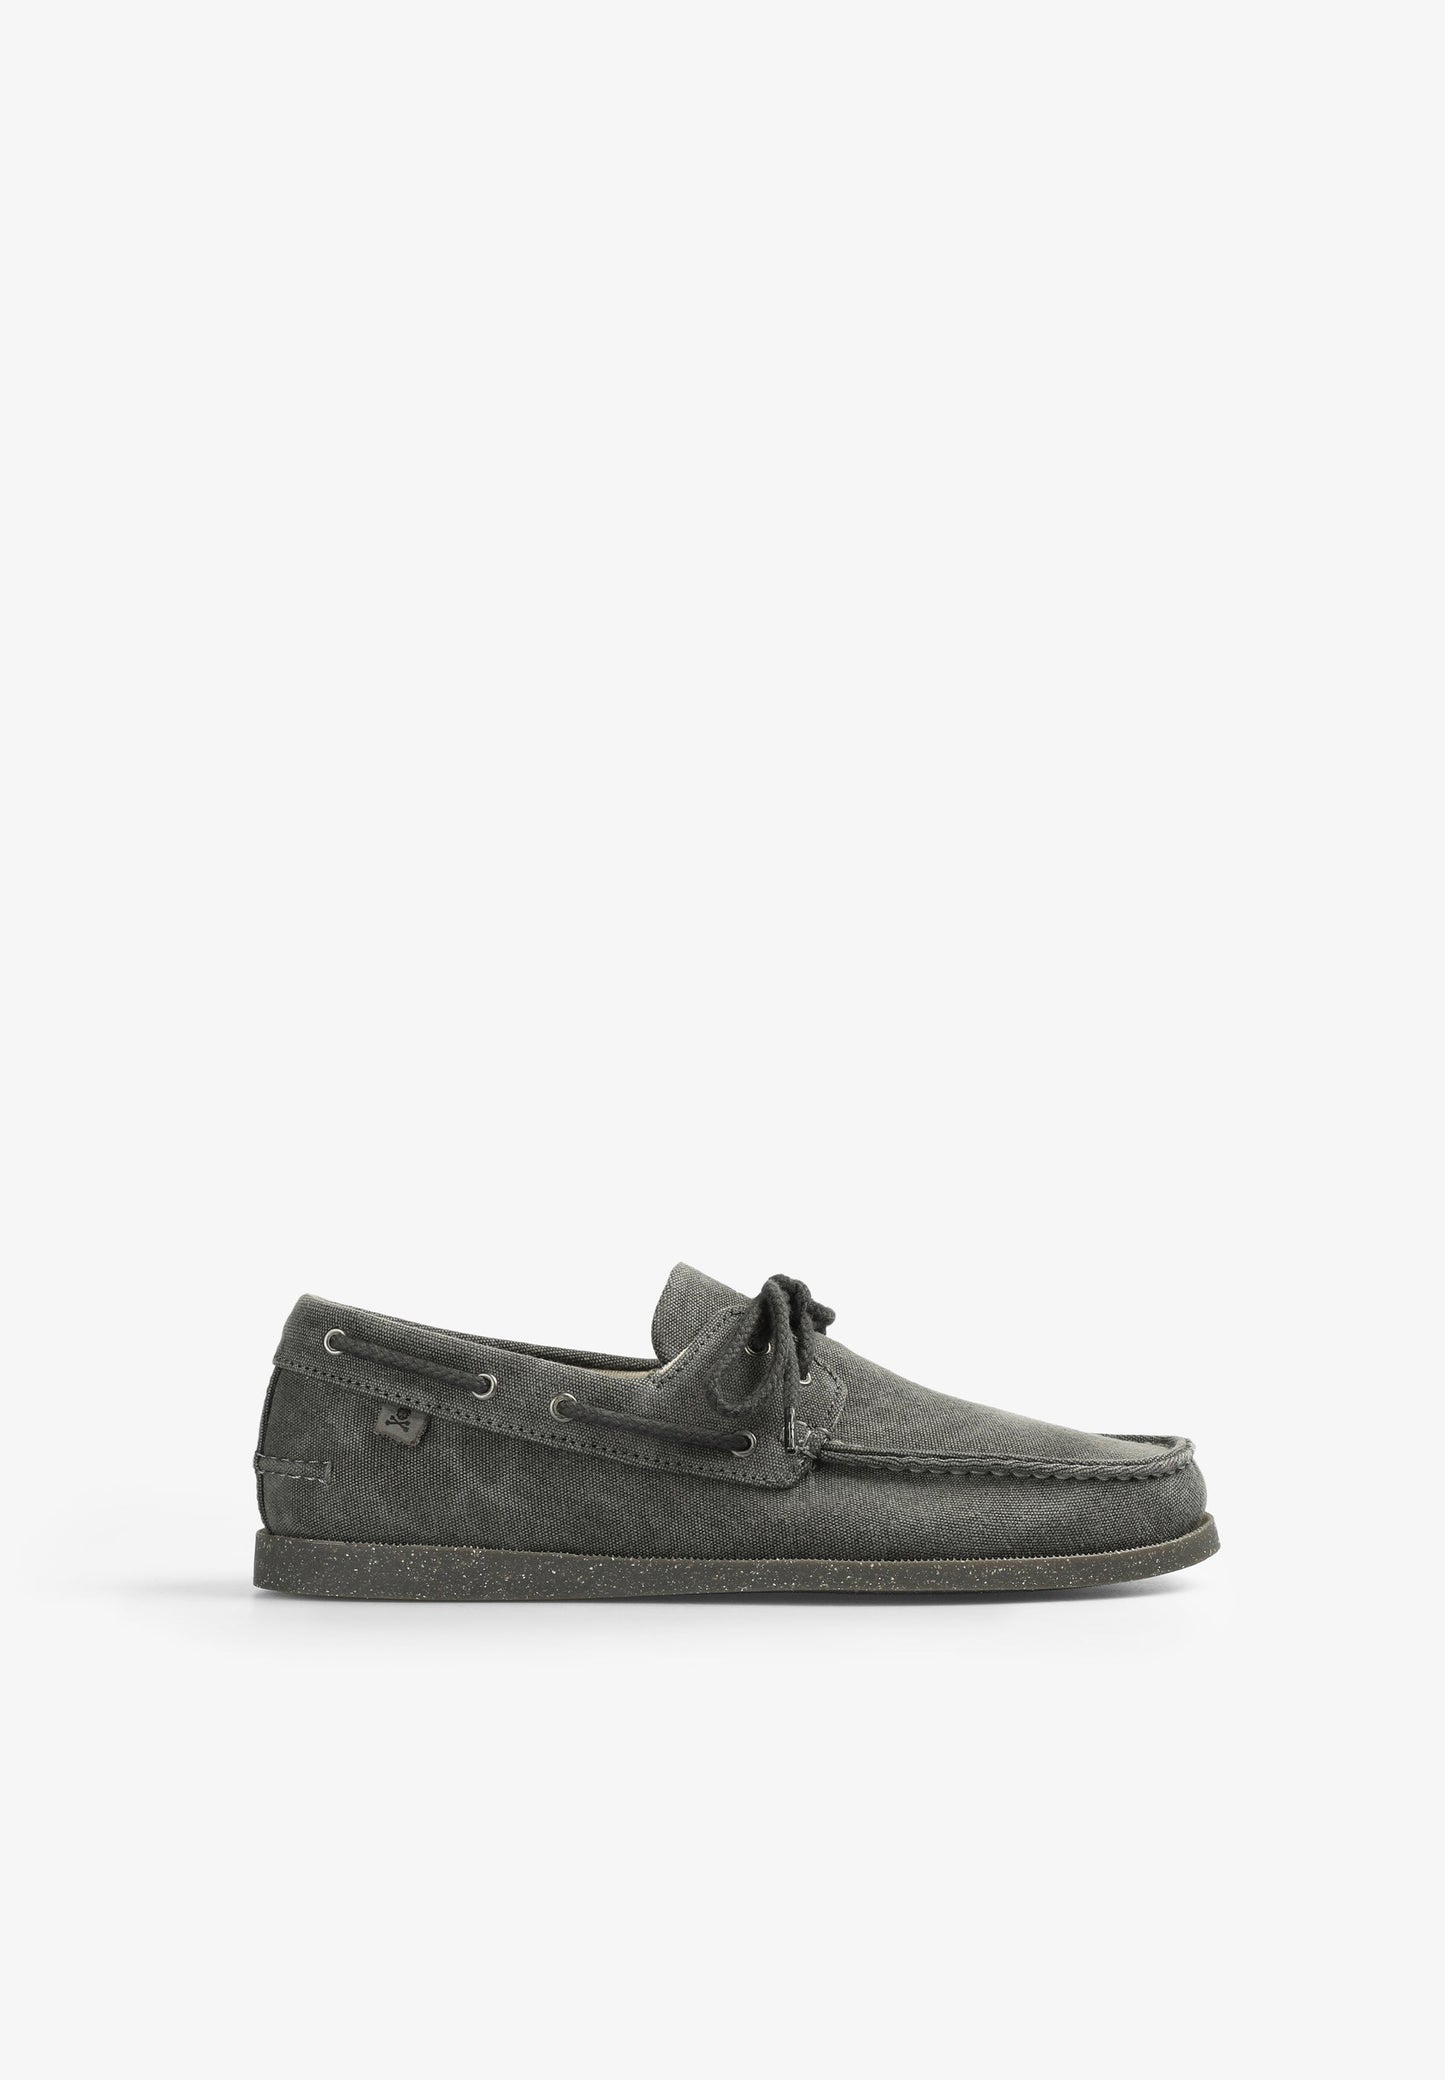 CANVAS BOAT SHOES